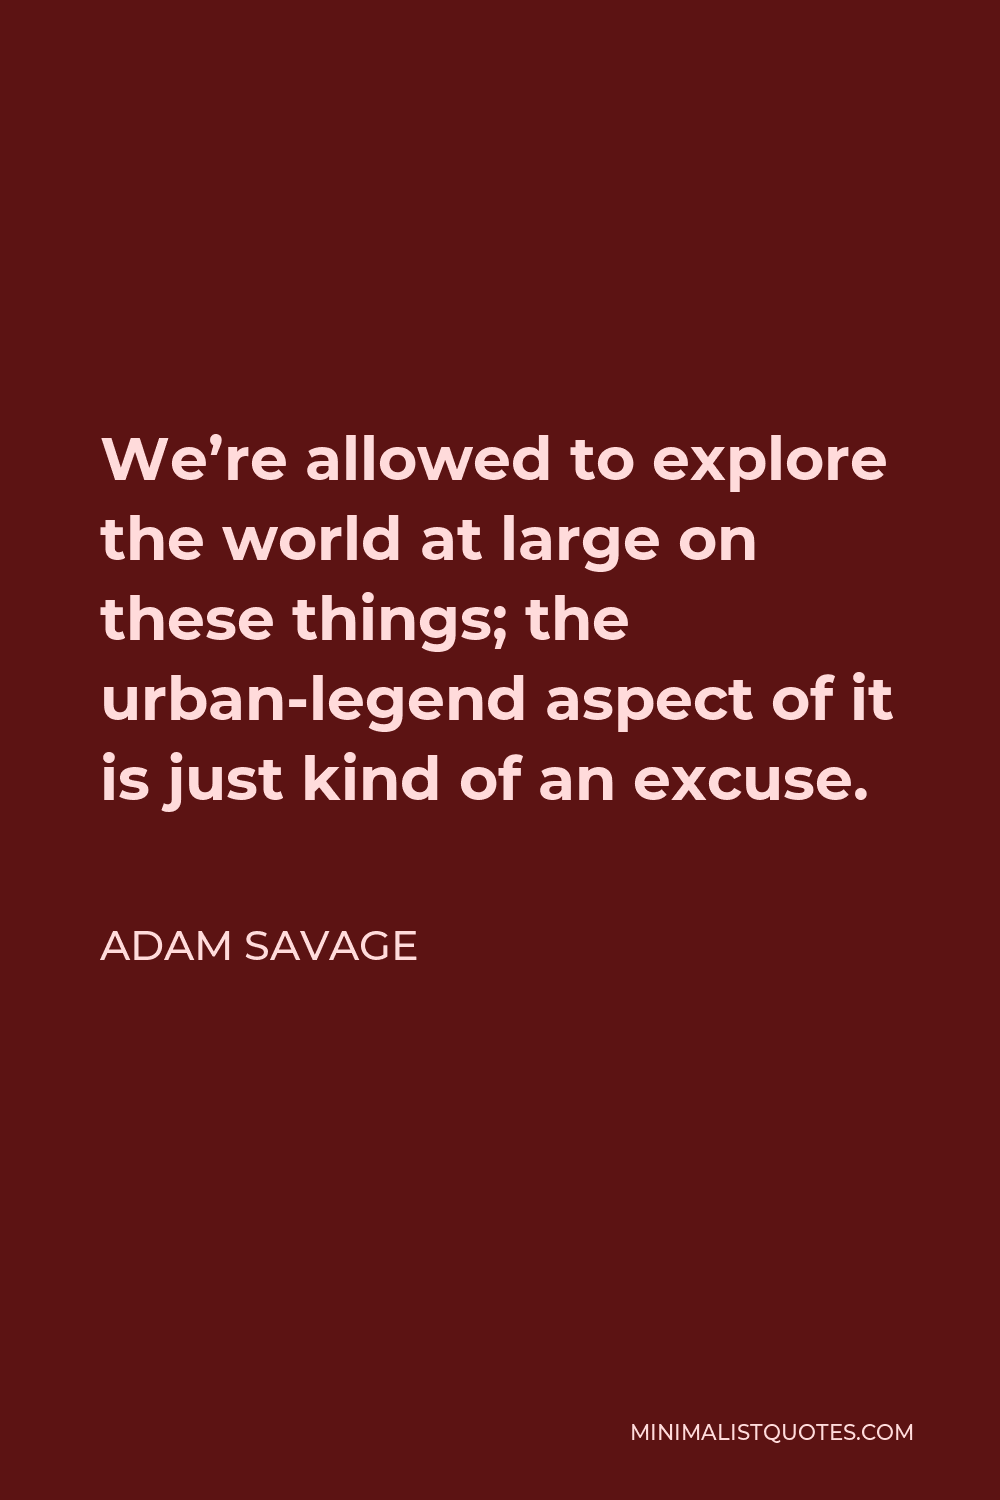 Adam Savage Quote - We’re allowed to explore the world at large on these things; the urban-legend aspect of it is just kind of an excuse.